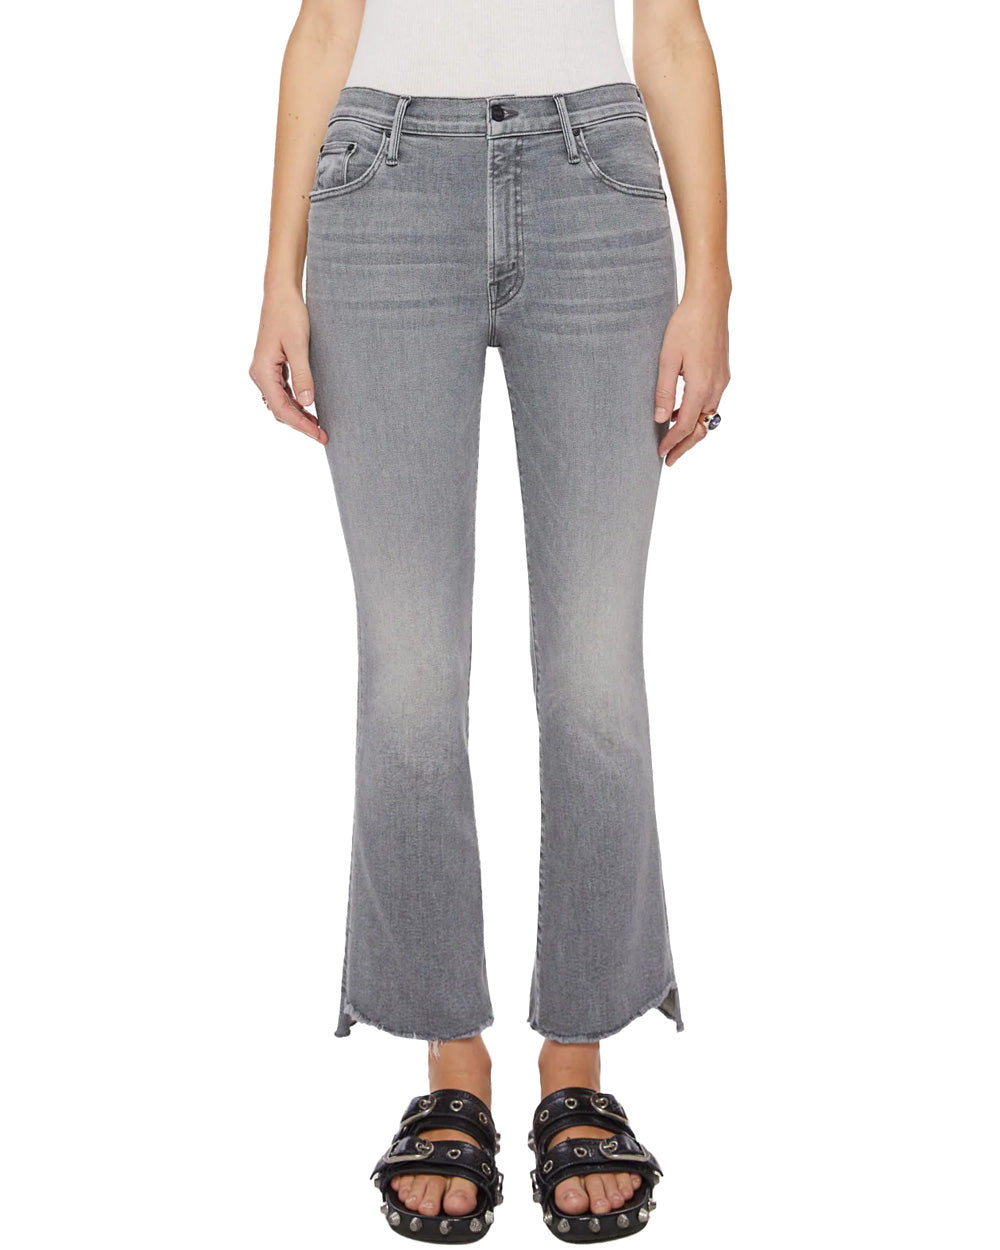 The Insider Crop Step Fray Jean in Barely There